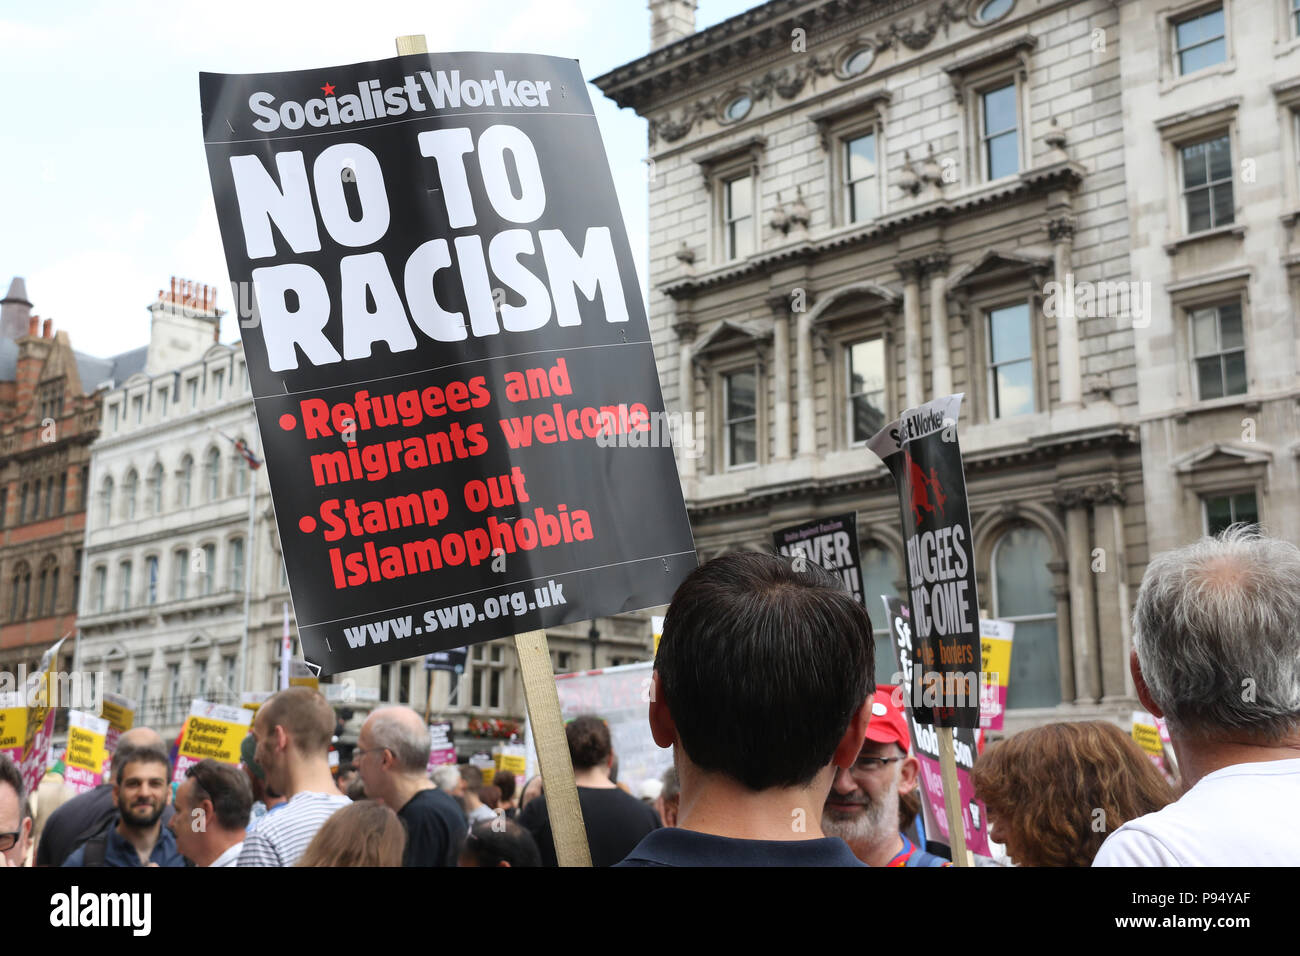 London, England. 14th July 2018. Socialist Workers Party supporters, Antifa and other far-left extremists held a protest in central London to oppose another protest in support of English patriot and journalist Tommy Robinson who was arrested for ‘breaching the peace’ for reporting on a Muslim child grooming case outside court. These charges were later changed and he was sent to prison for 13 months in a case, which many believe to be politically motivated.  Credit: Rich Credit: Richard Milnes/Alamy Live News Stock Photo